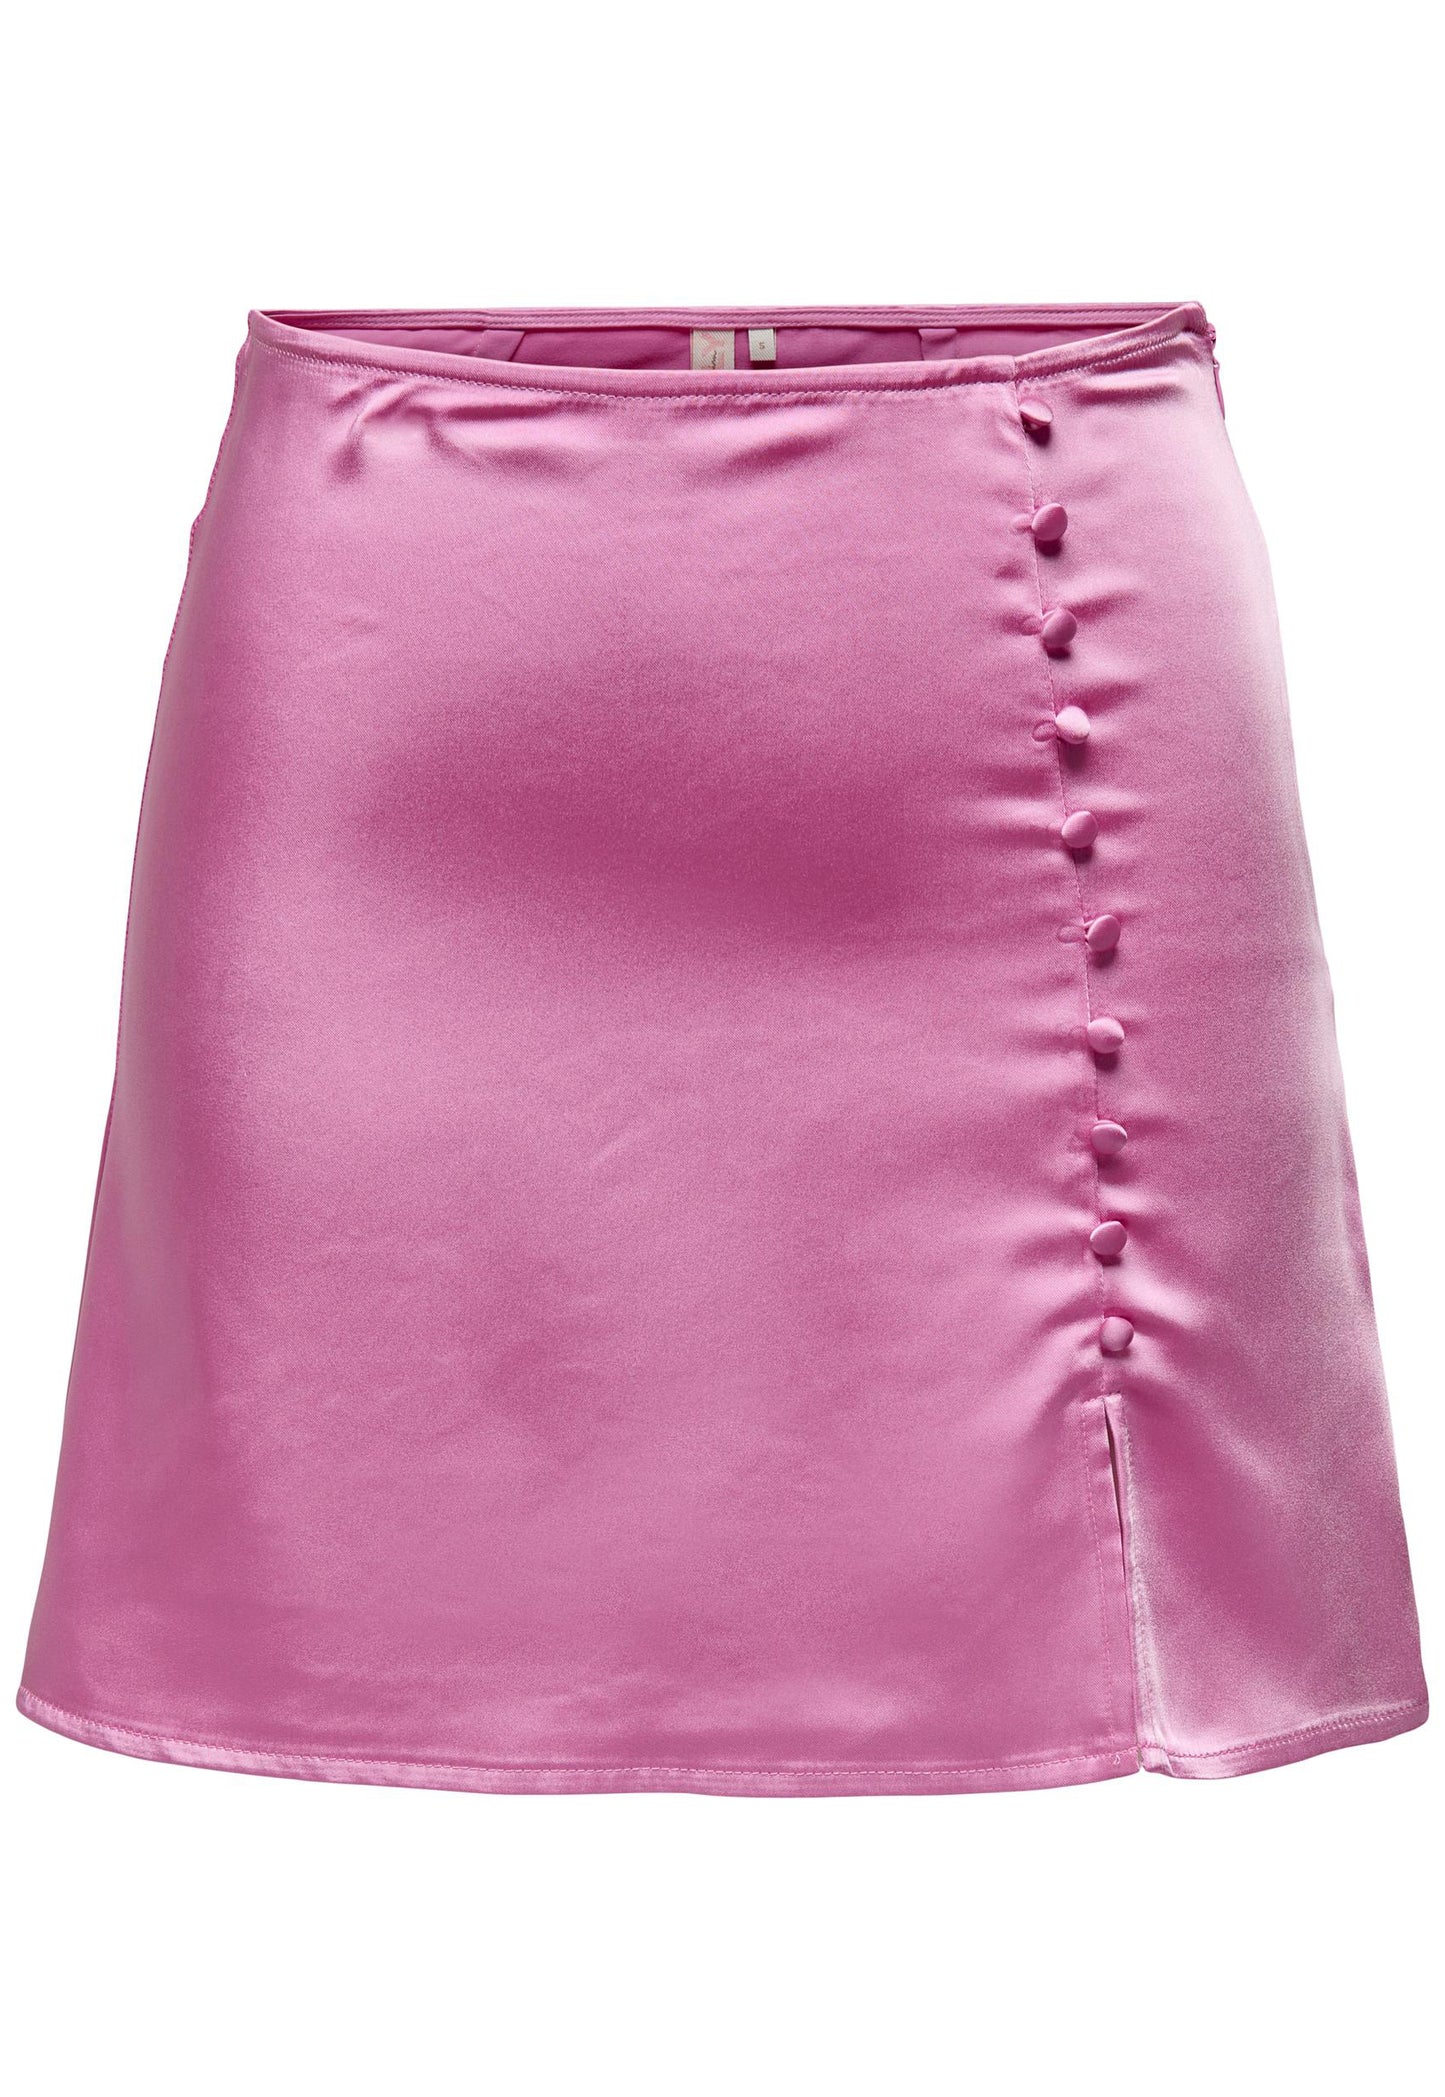 ONLY Mayra Satin Side Button Mini Skirt with Slit in Pink - concretebartops